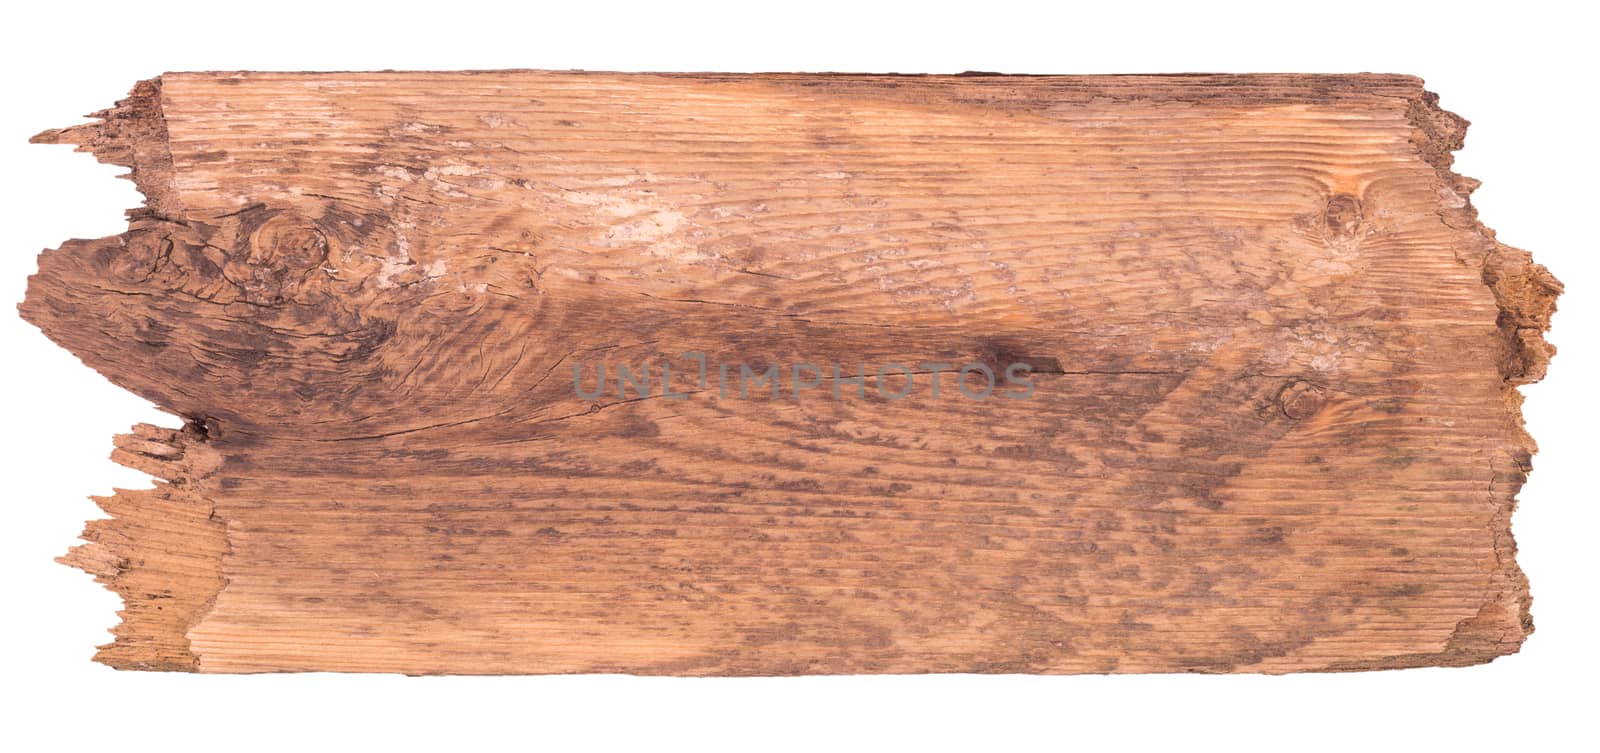 Old wooden board isolated on a white background. Top view.